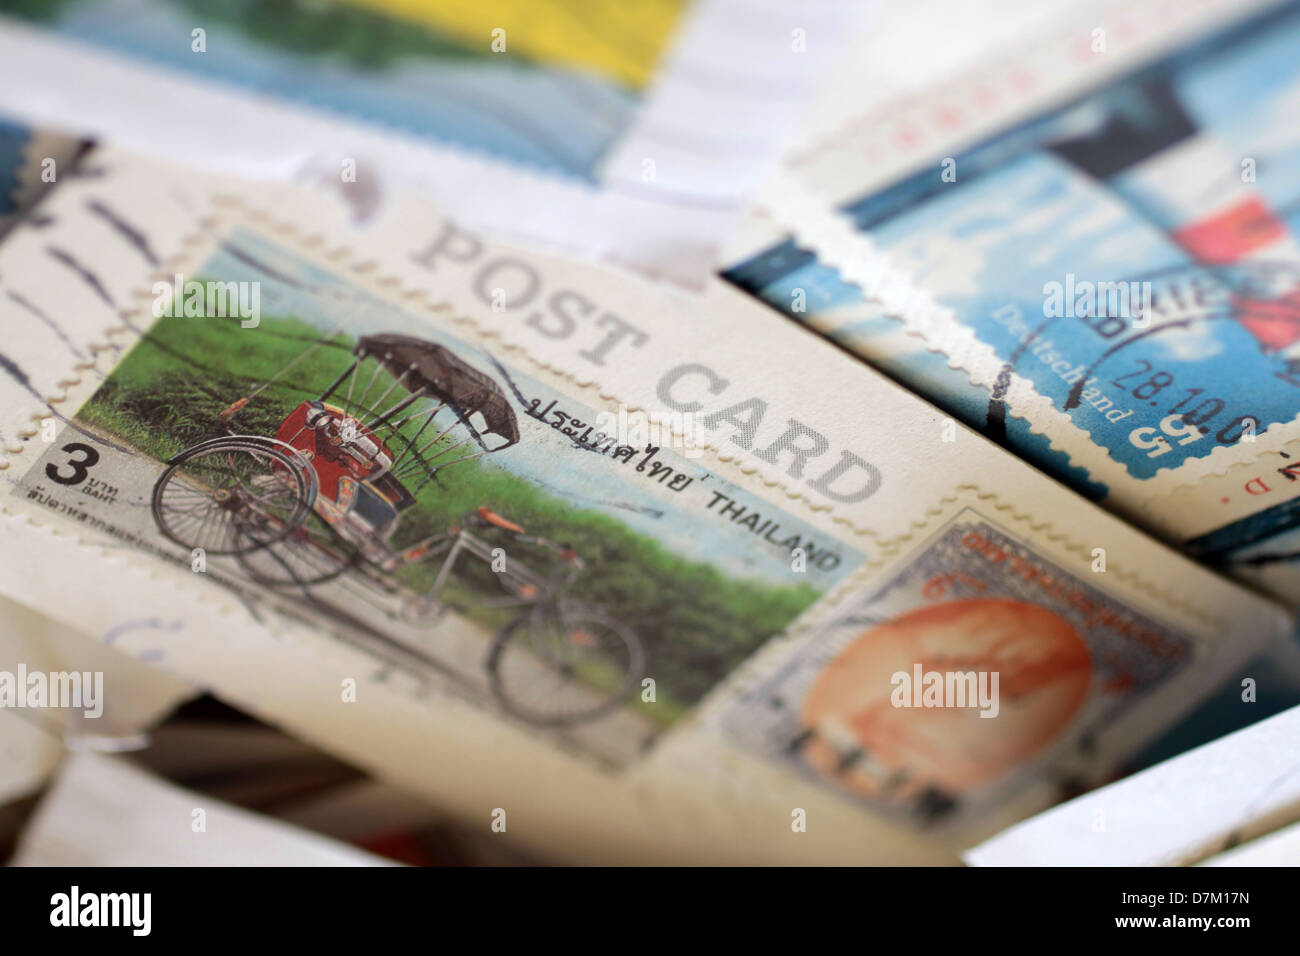 Postage stamps from around the world, varied and colorful Stock Photo